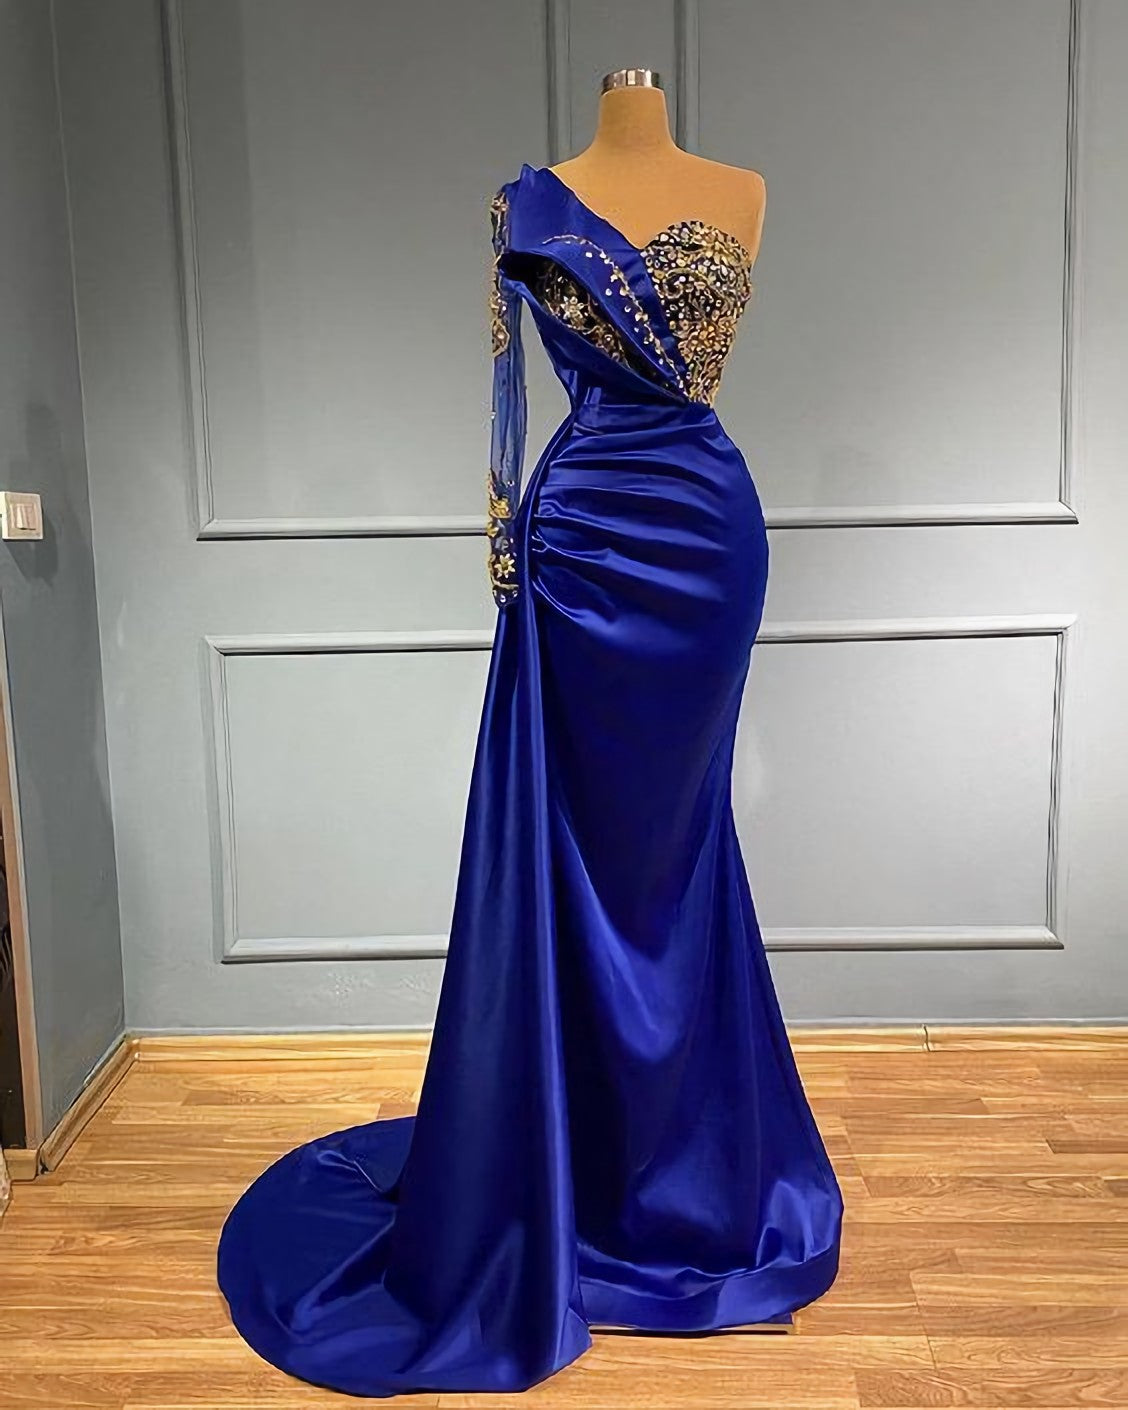 Prom Aesthetic, Blue Long Mermaid Evening Gowns Long Prom Dress